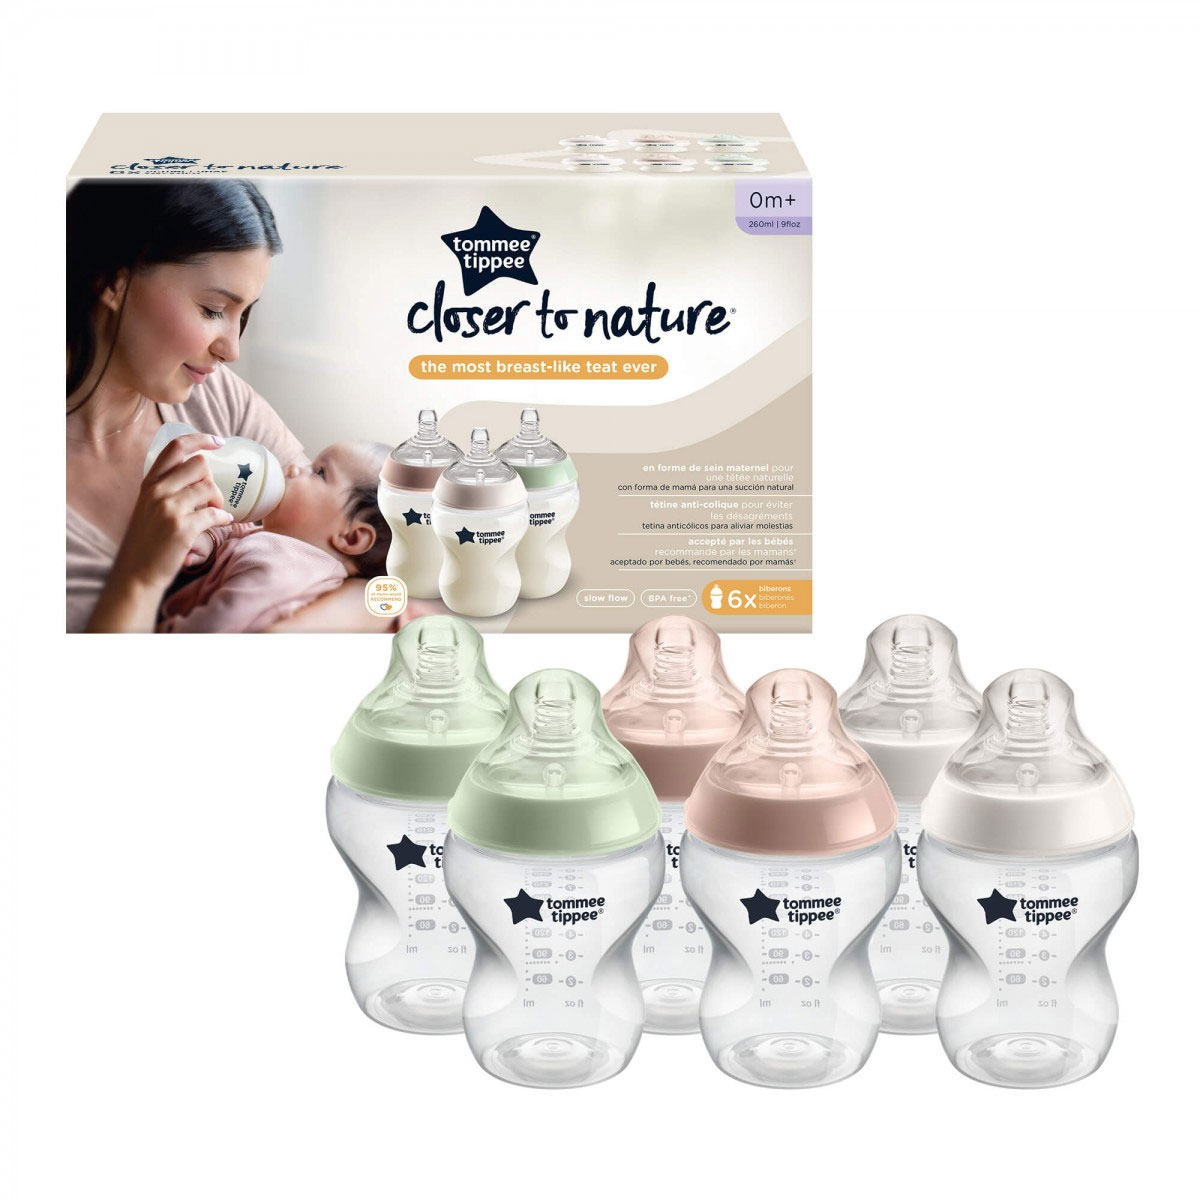 Tommee Tippee Perfect Prep - Bottles & accessories - Feeding